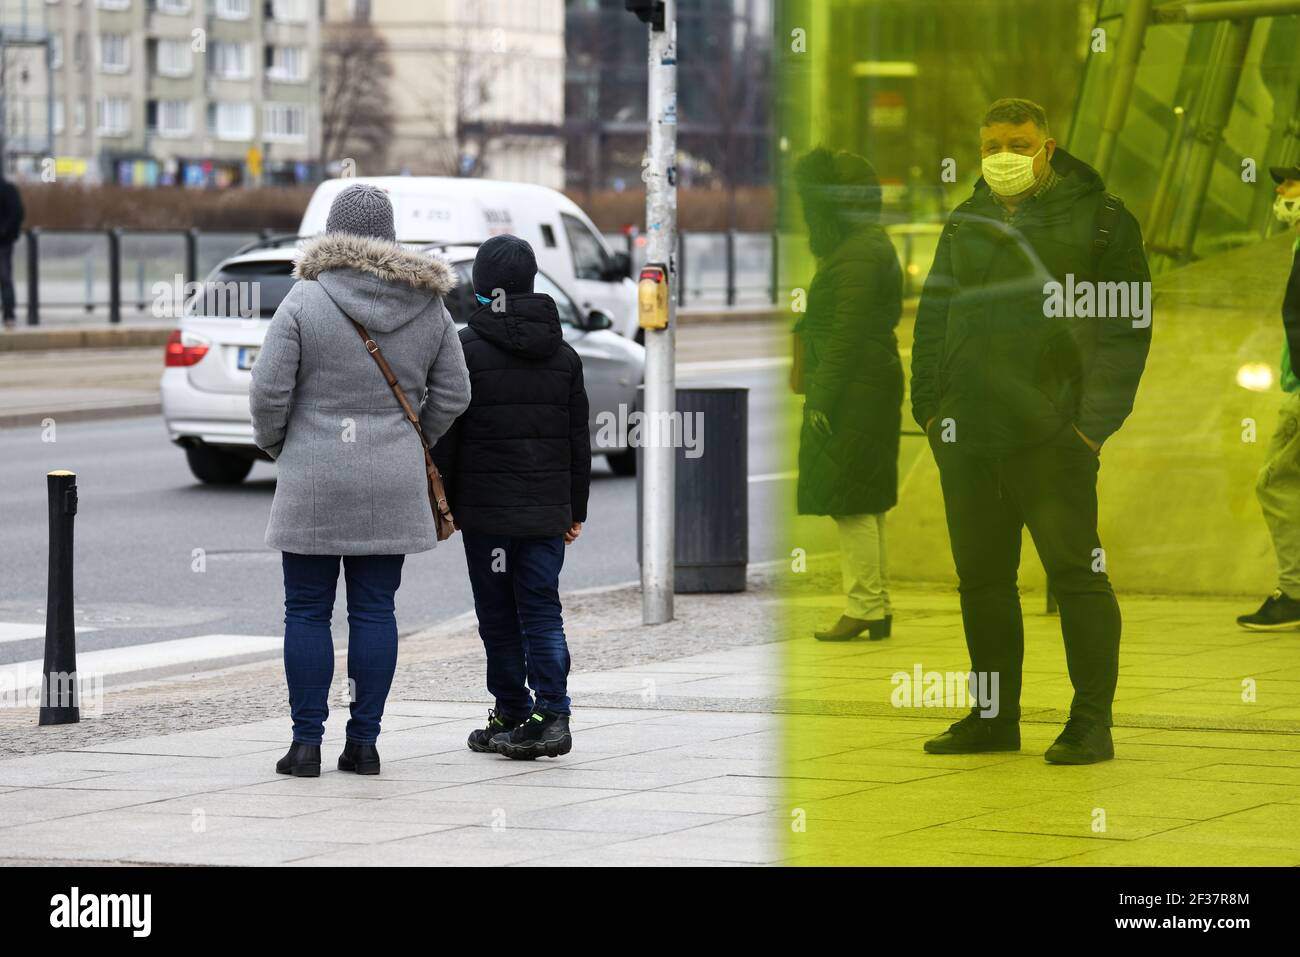 Warsaw, Poland. 15th Mar, 2021. A man wearing a face mask is seen in Warsaw, Poland, on March 15, 2021. The Polish government reintroduced lockdown measures in Warsaw on Monday. According to Polish Health Minister Adam Niedzielski, the lockdown is in force from March 15 to March 28. Hotels, cultural institutions and sports facilities are shut down and the operation of shopping centers is also be restricted. Credit: Jaap Arriens/Xinhua/Alamy Live News Stock Photo